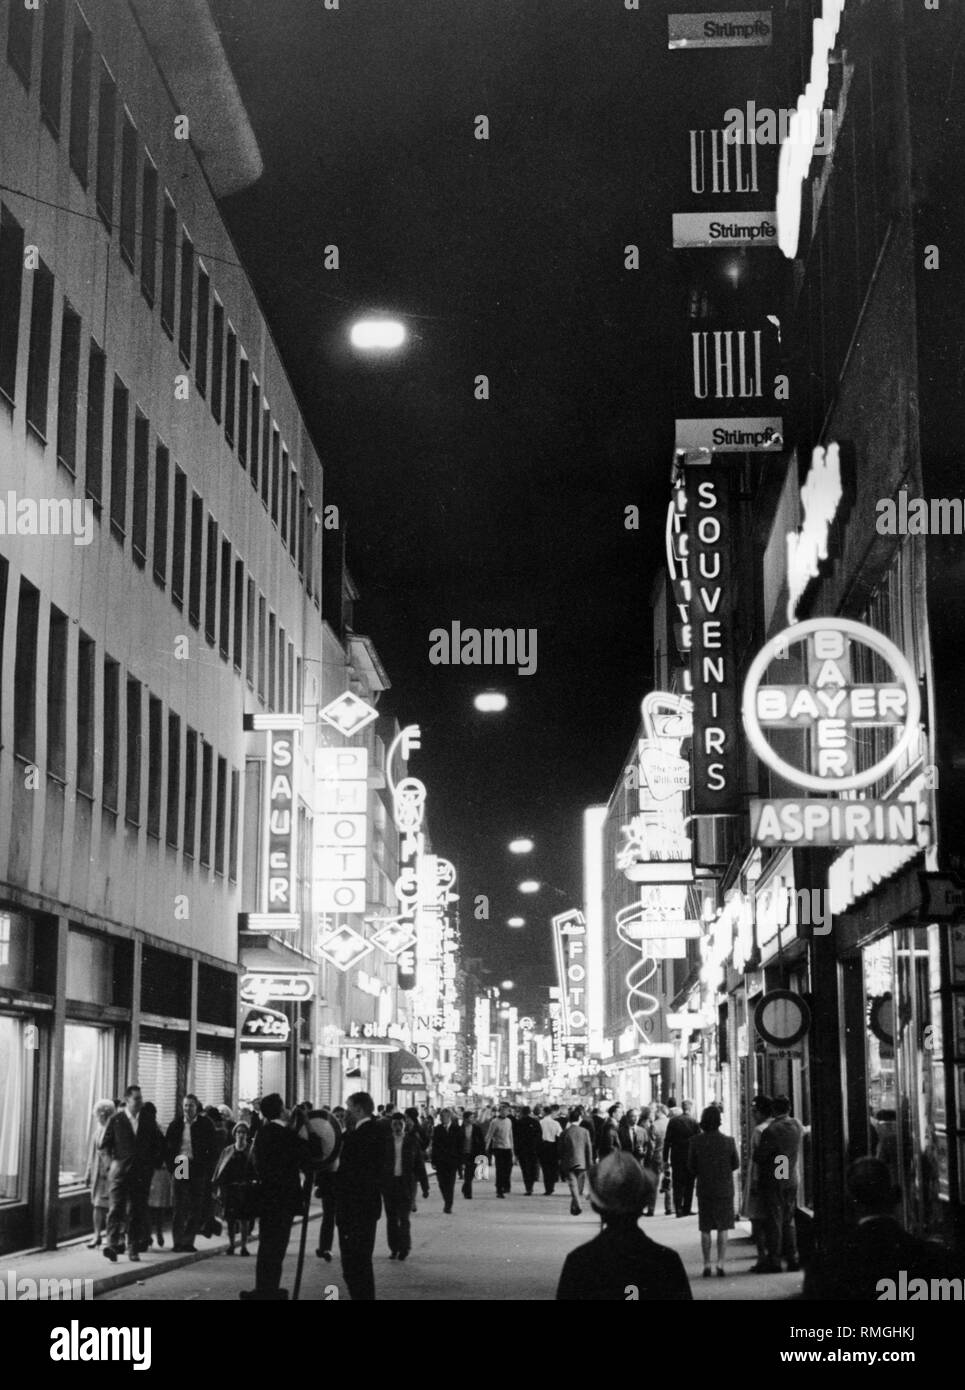 View of the Hohe Strasse in Cologne at night. The street is lined with illuminated advertising signs. undated photo, ca 1970s Stock Photo